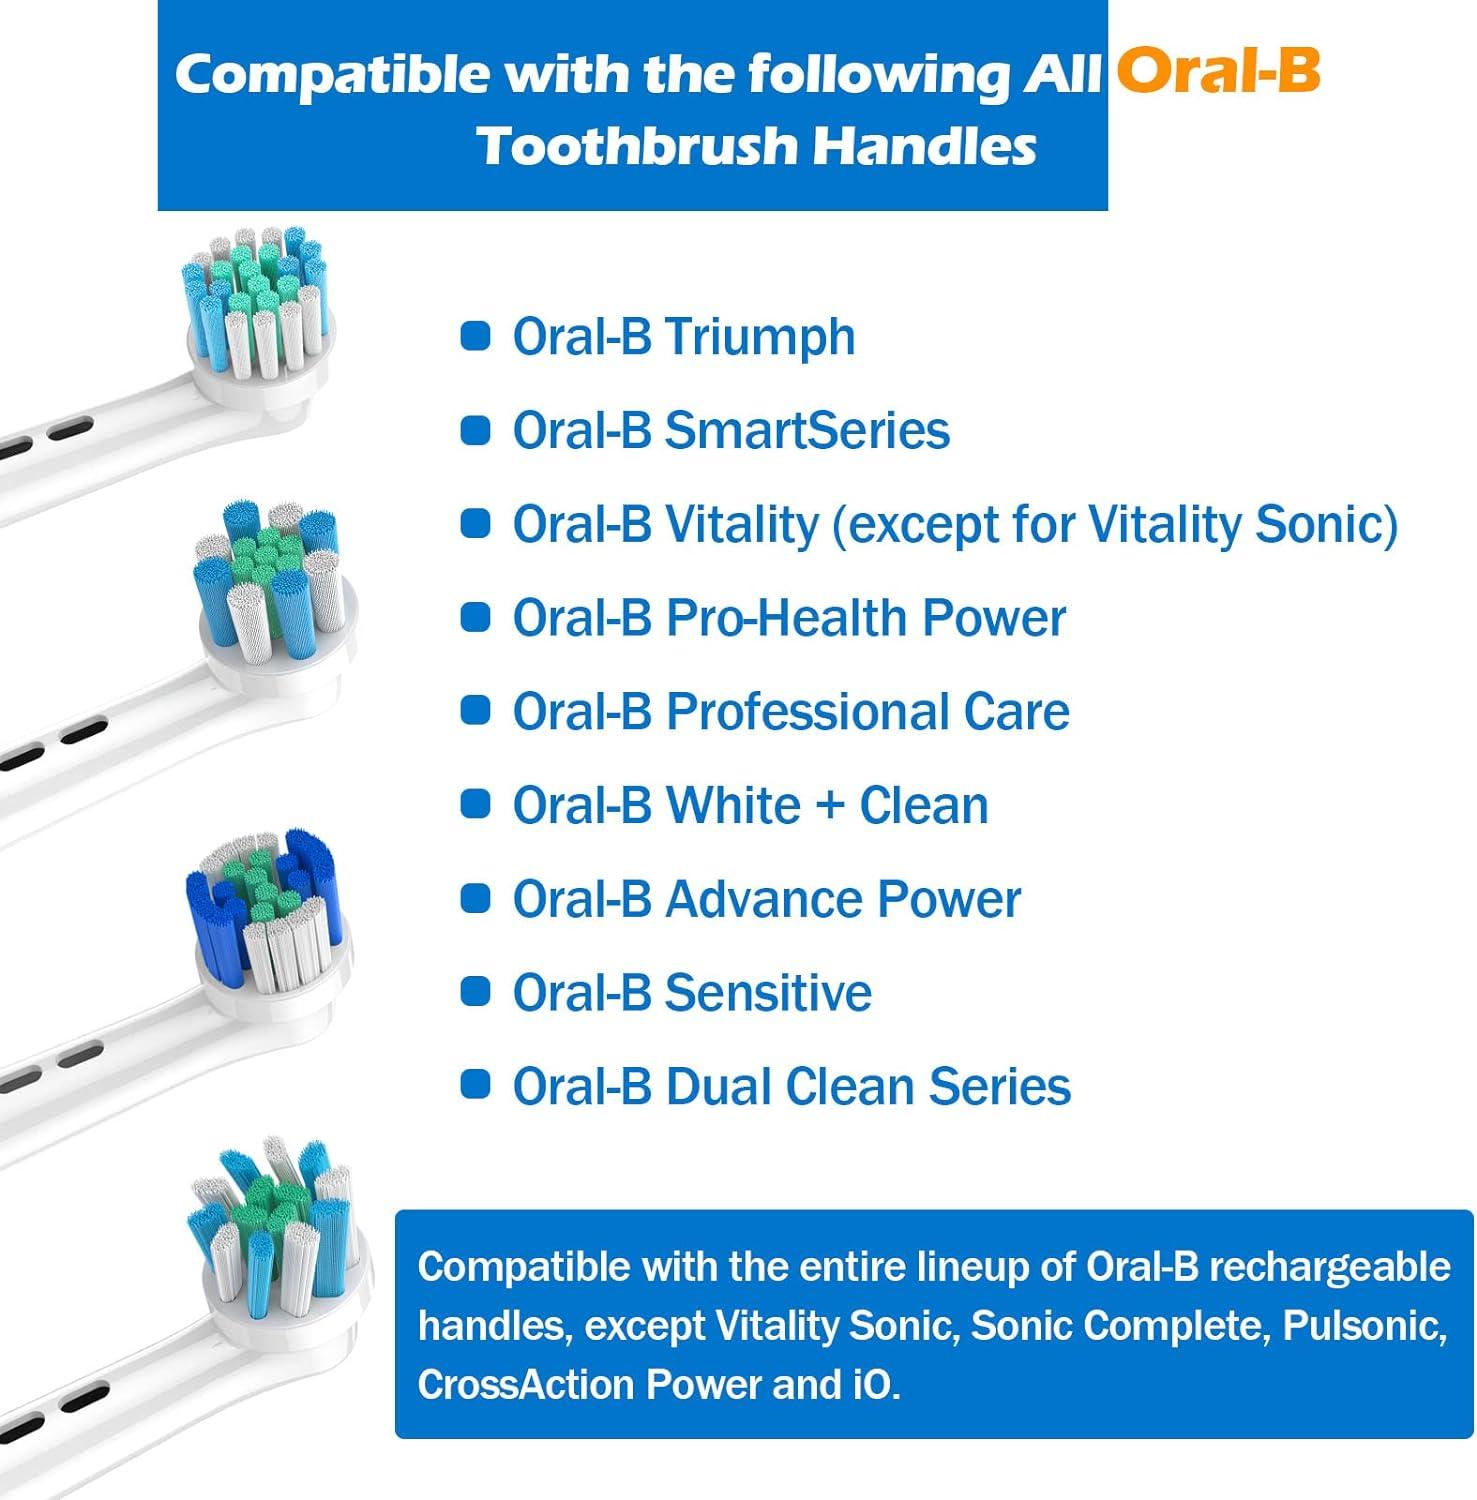 Replacement Toothbrush Heads Compatible with Oral B Braun,16 Pack  Professional Electric Toothbrush Heads Brush Heads Refill for Oral-B  7000/Pro